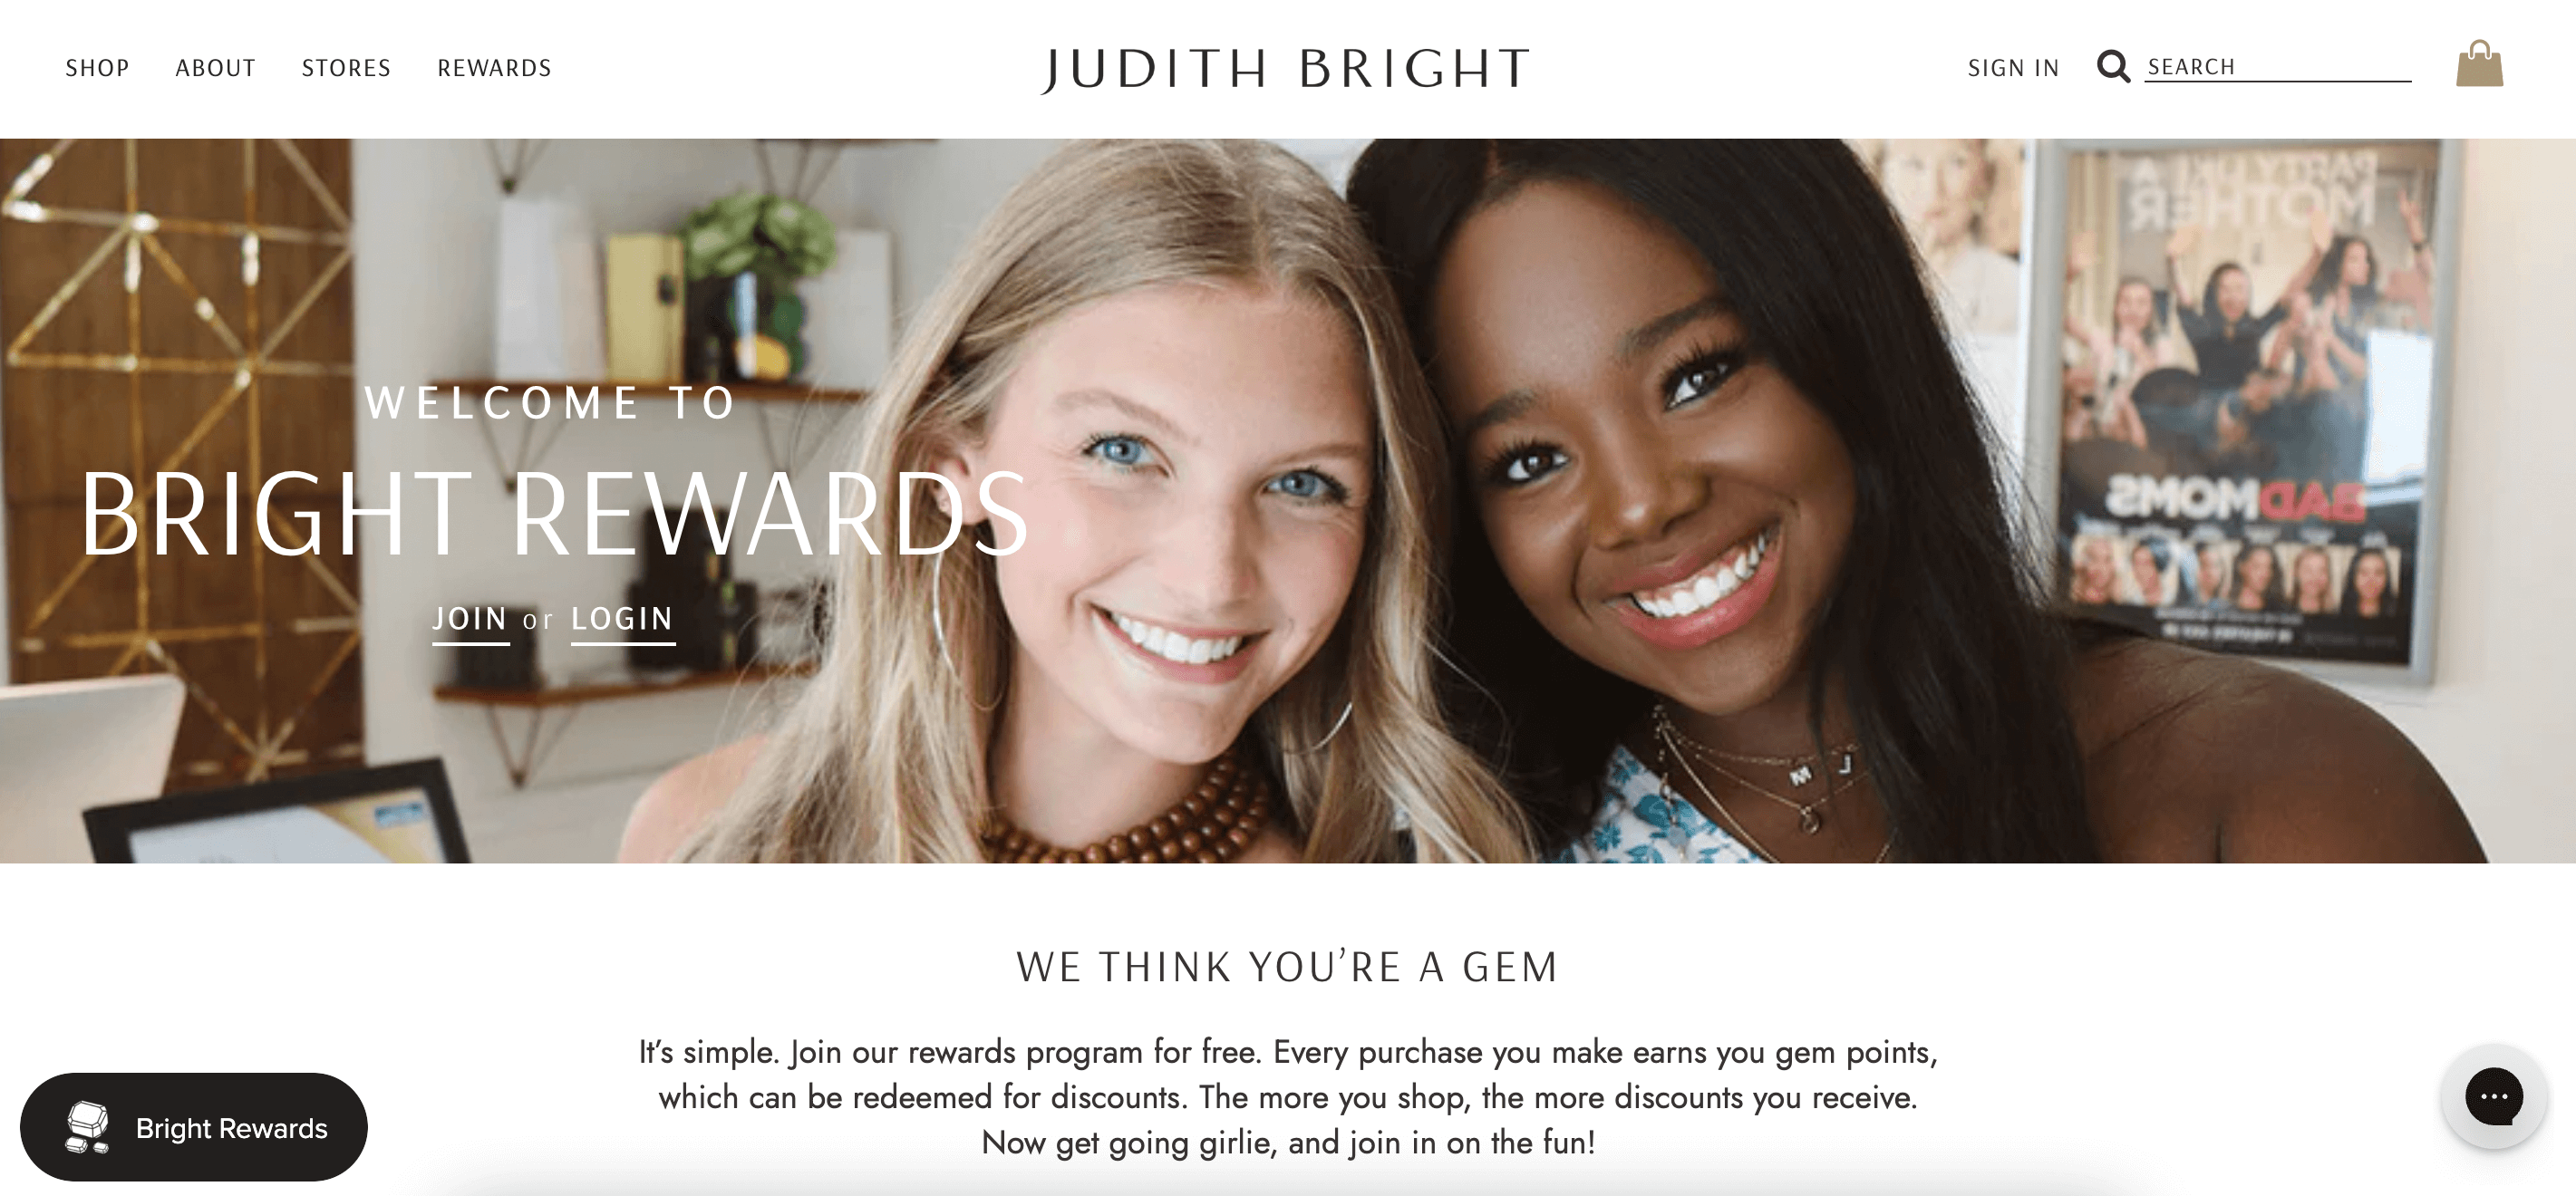 screenshot of Judith Bright's rewards homepage showing two smiling friends